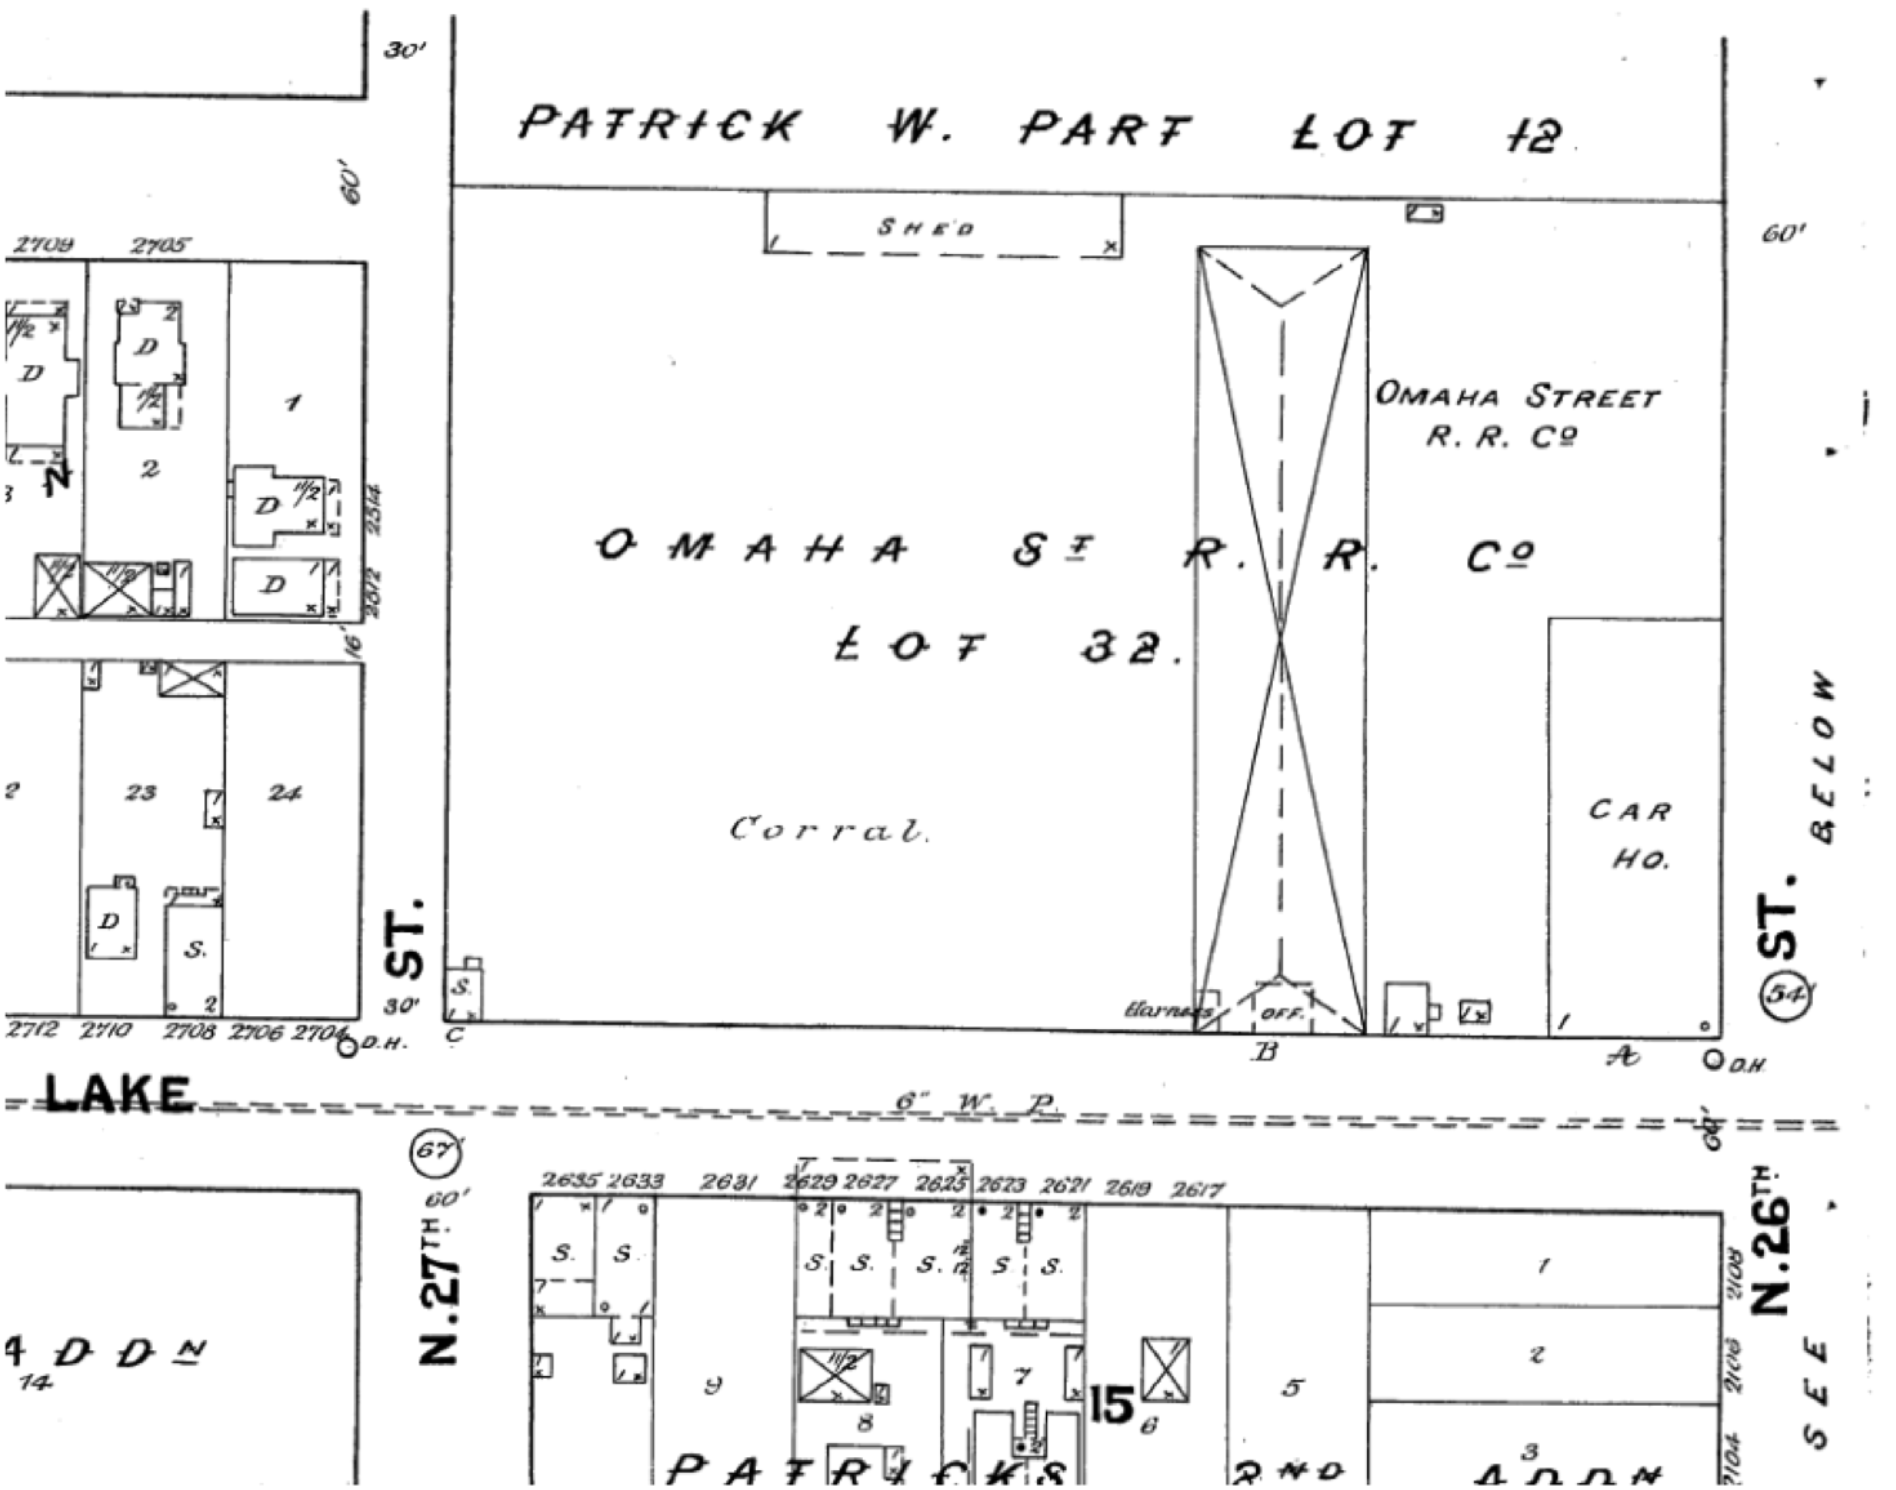 This is a c 1885 map of the Omaha Street Railway Company barn and corral at North 26th and Lake Streets.